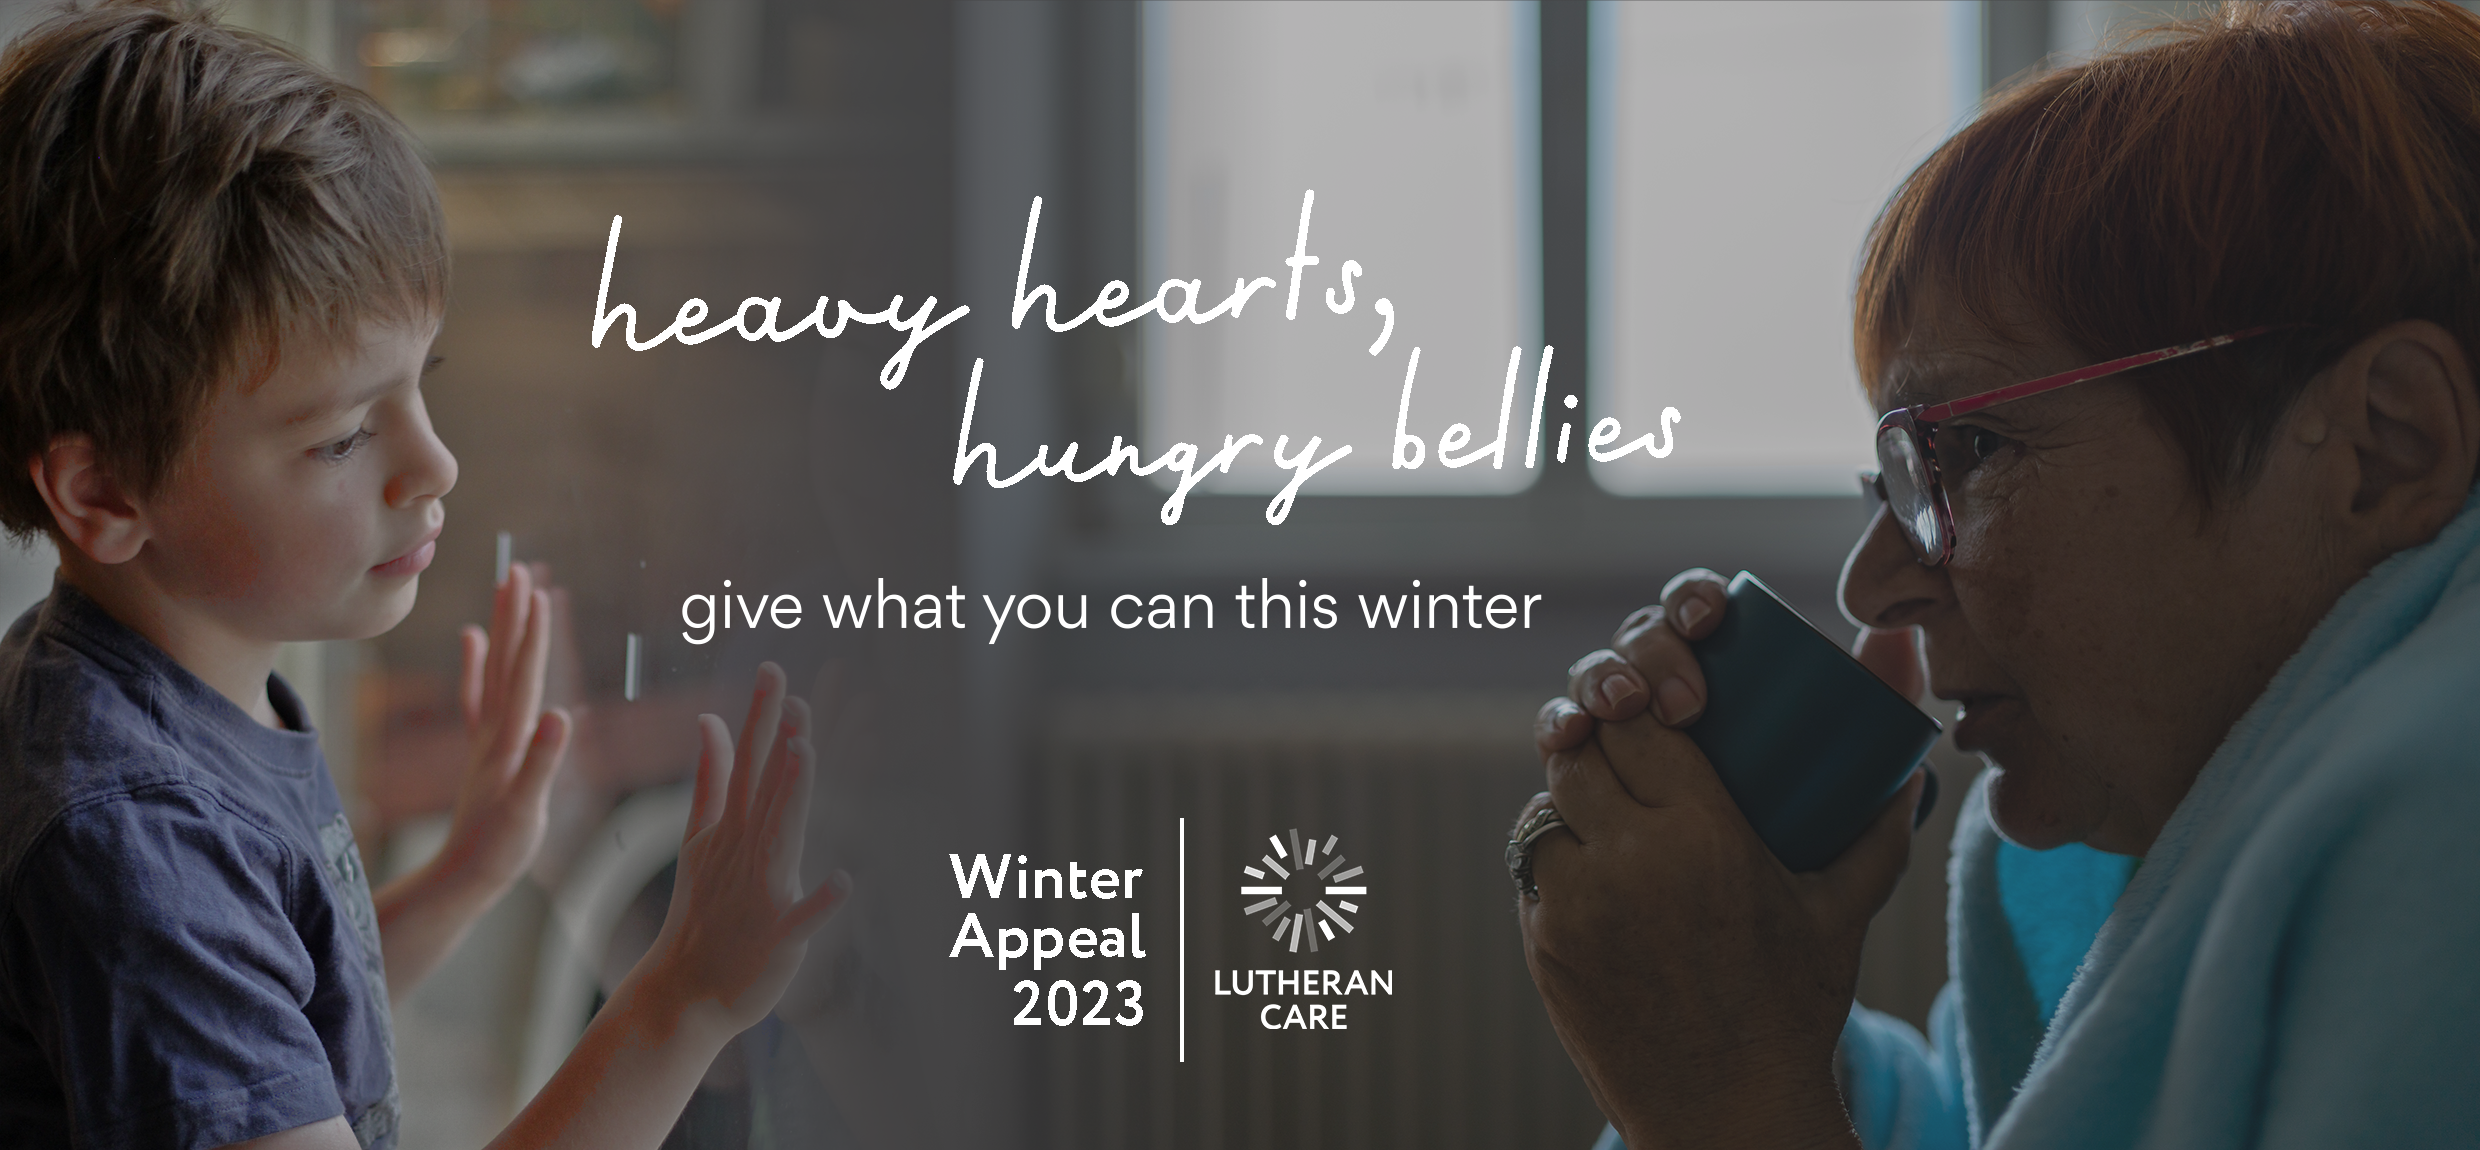 Image of a young boy looking out the window and an older woman in a dressing gown drinking a hot drink to keep warm. Text reads heavy hearts hungry bellies give what you can this winter. Lutheran Care logo and Winter Appeal 2023 appears at the bottom of graphic.